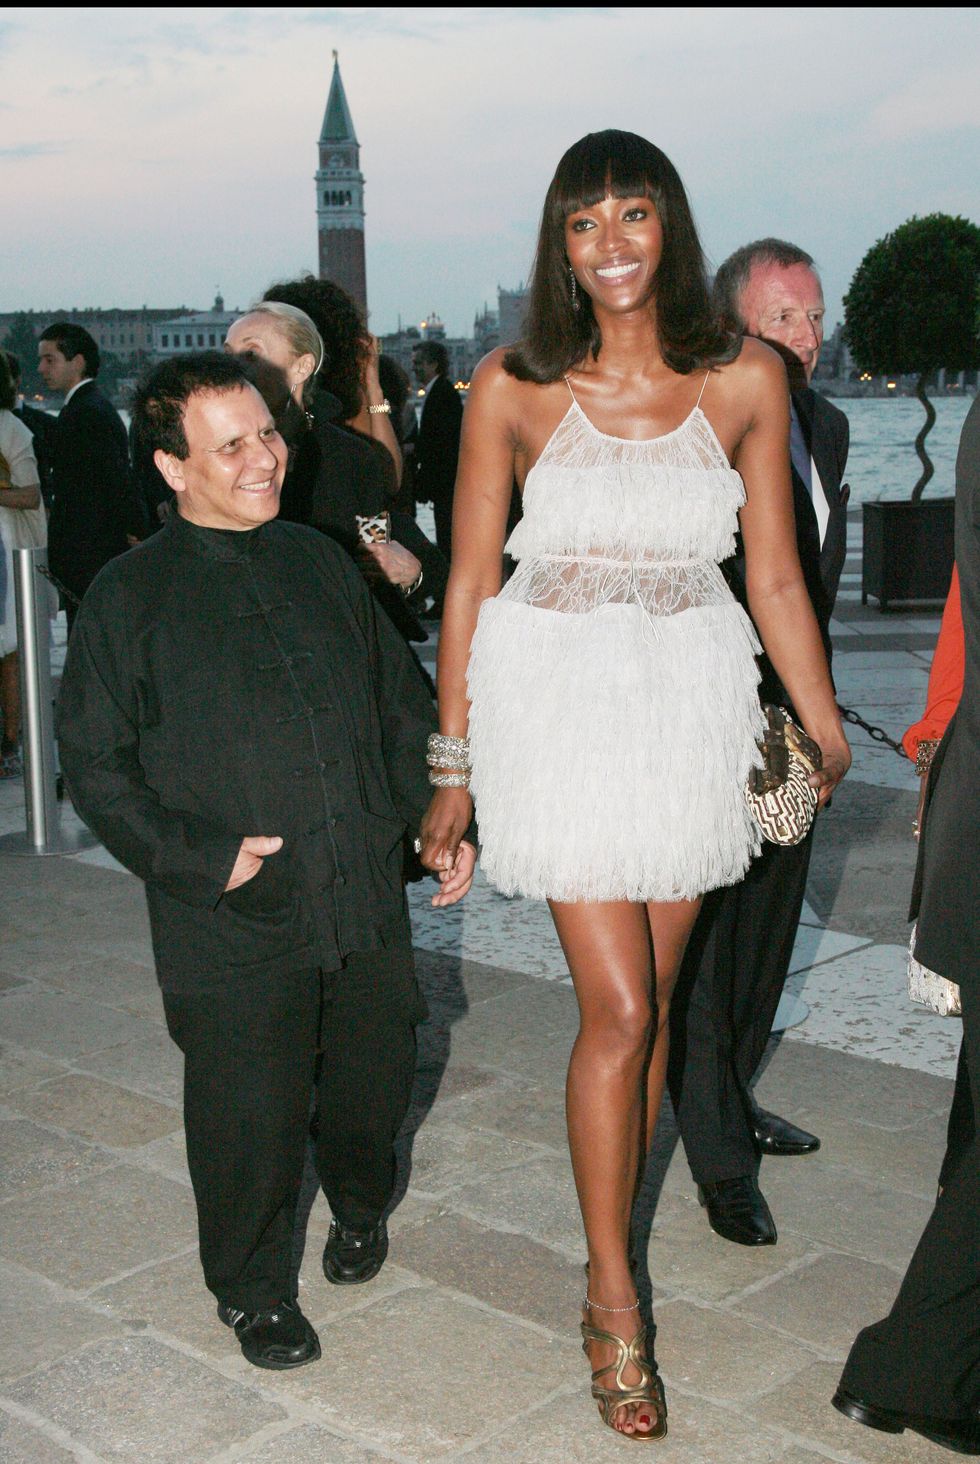 naomi campbell and azzedine alaia dinner given at the foundation giorgio cini isola di san giorgio for the exhibition sequence 1 painting and sculpture at the palazzo grassi during the biennale of venice 2007 photo by bertrand rindoff petroffgetty images